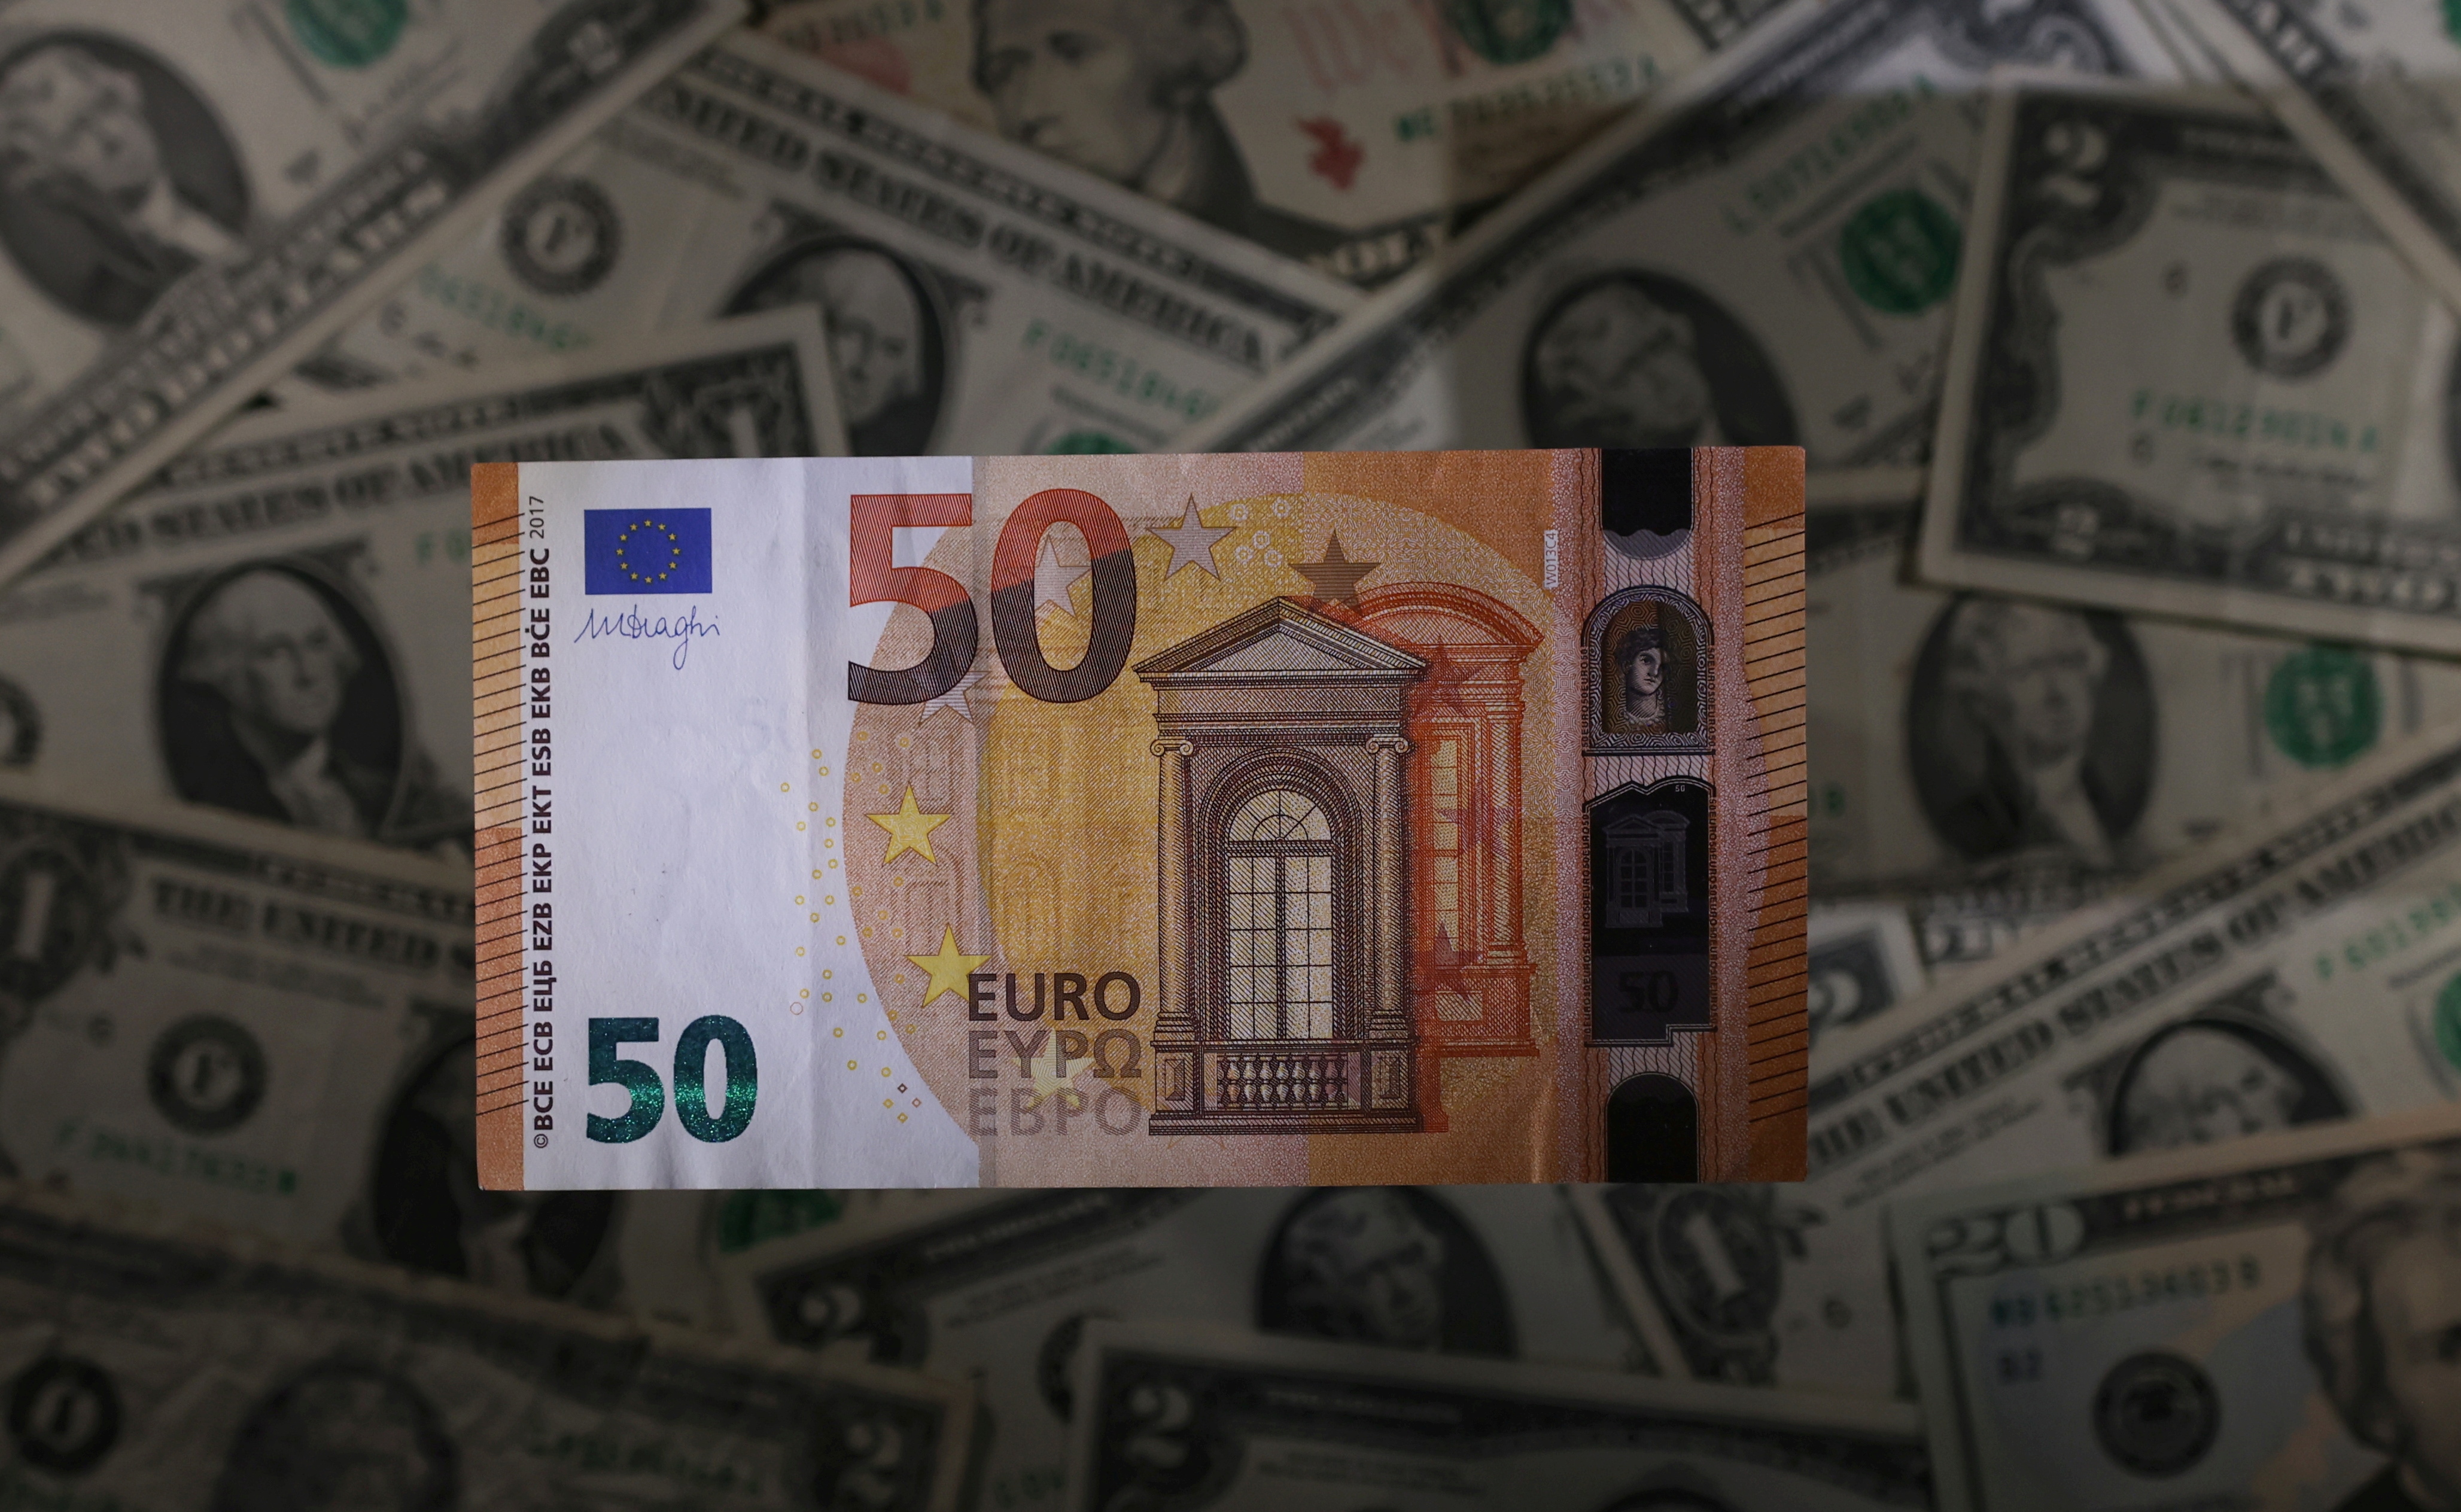 Euro banknote is seen placed on U.S. Dollar banknotes in this illustration